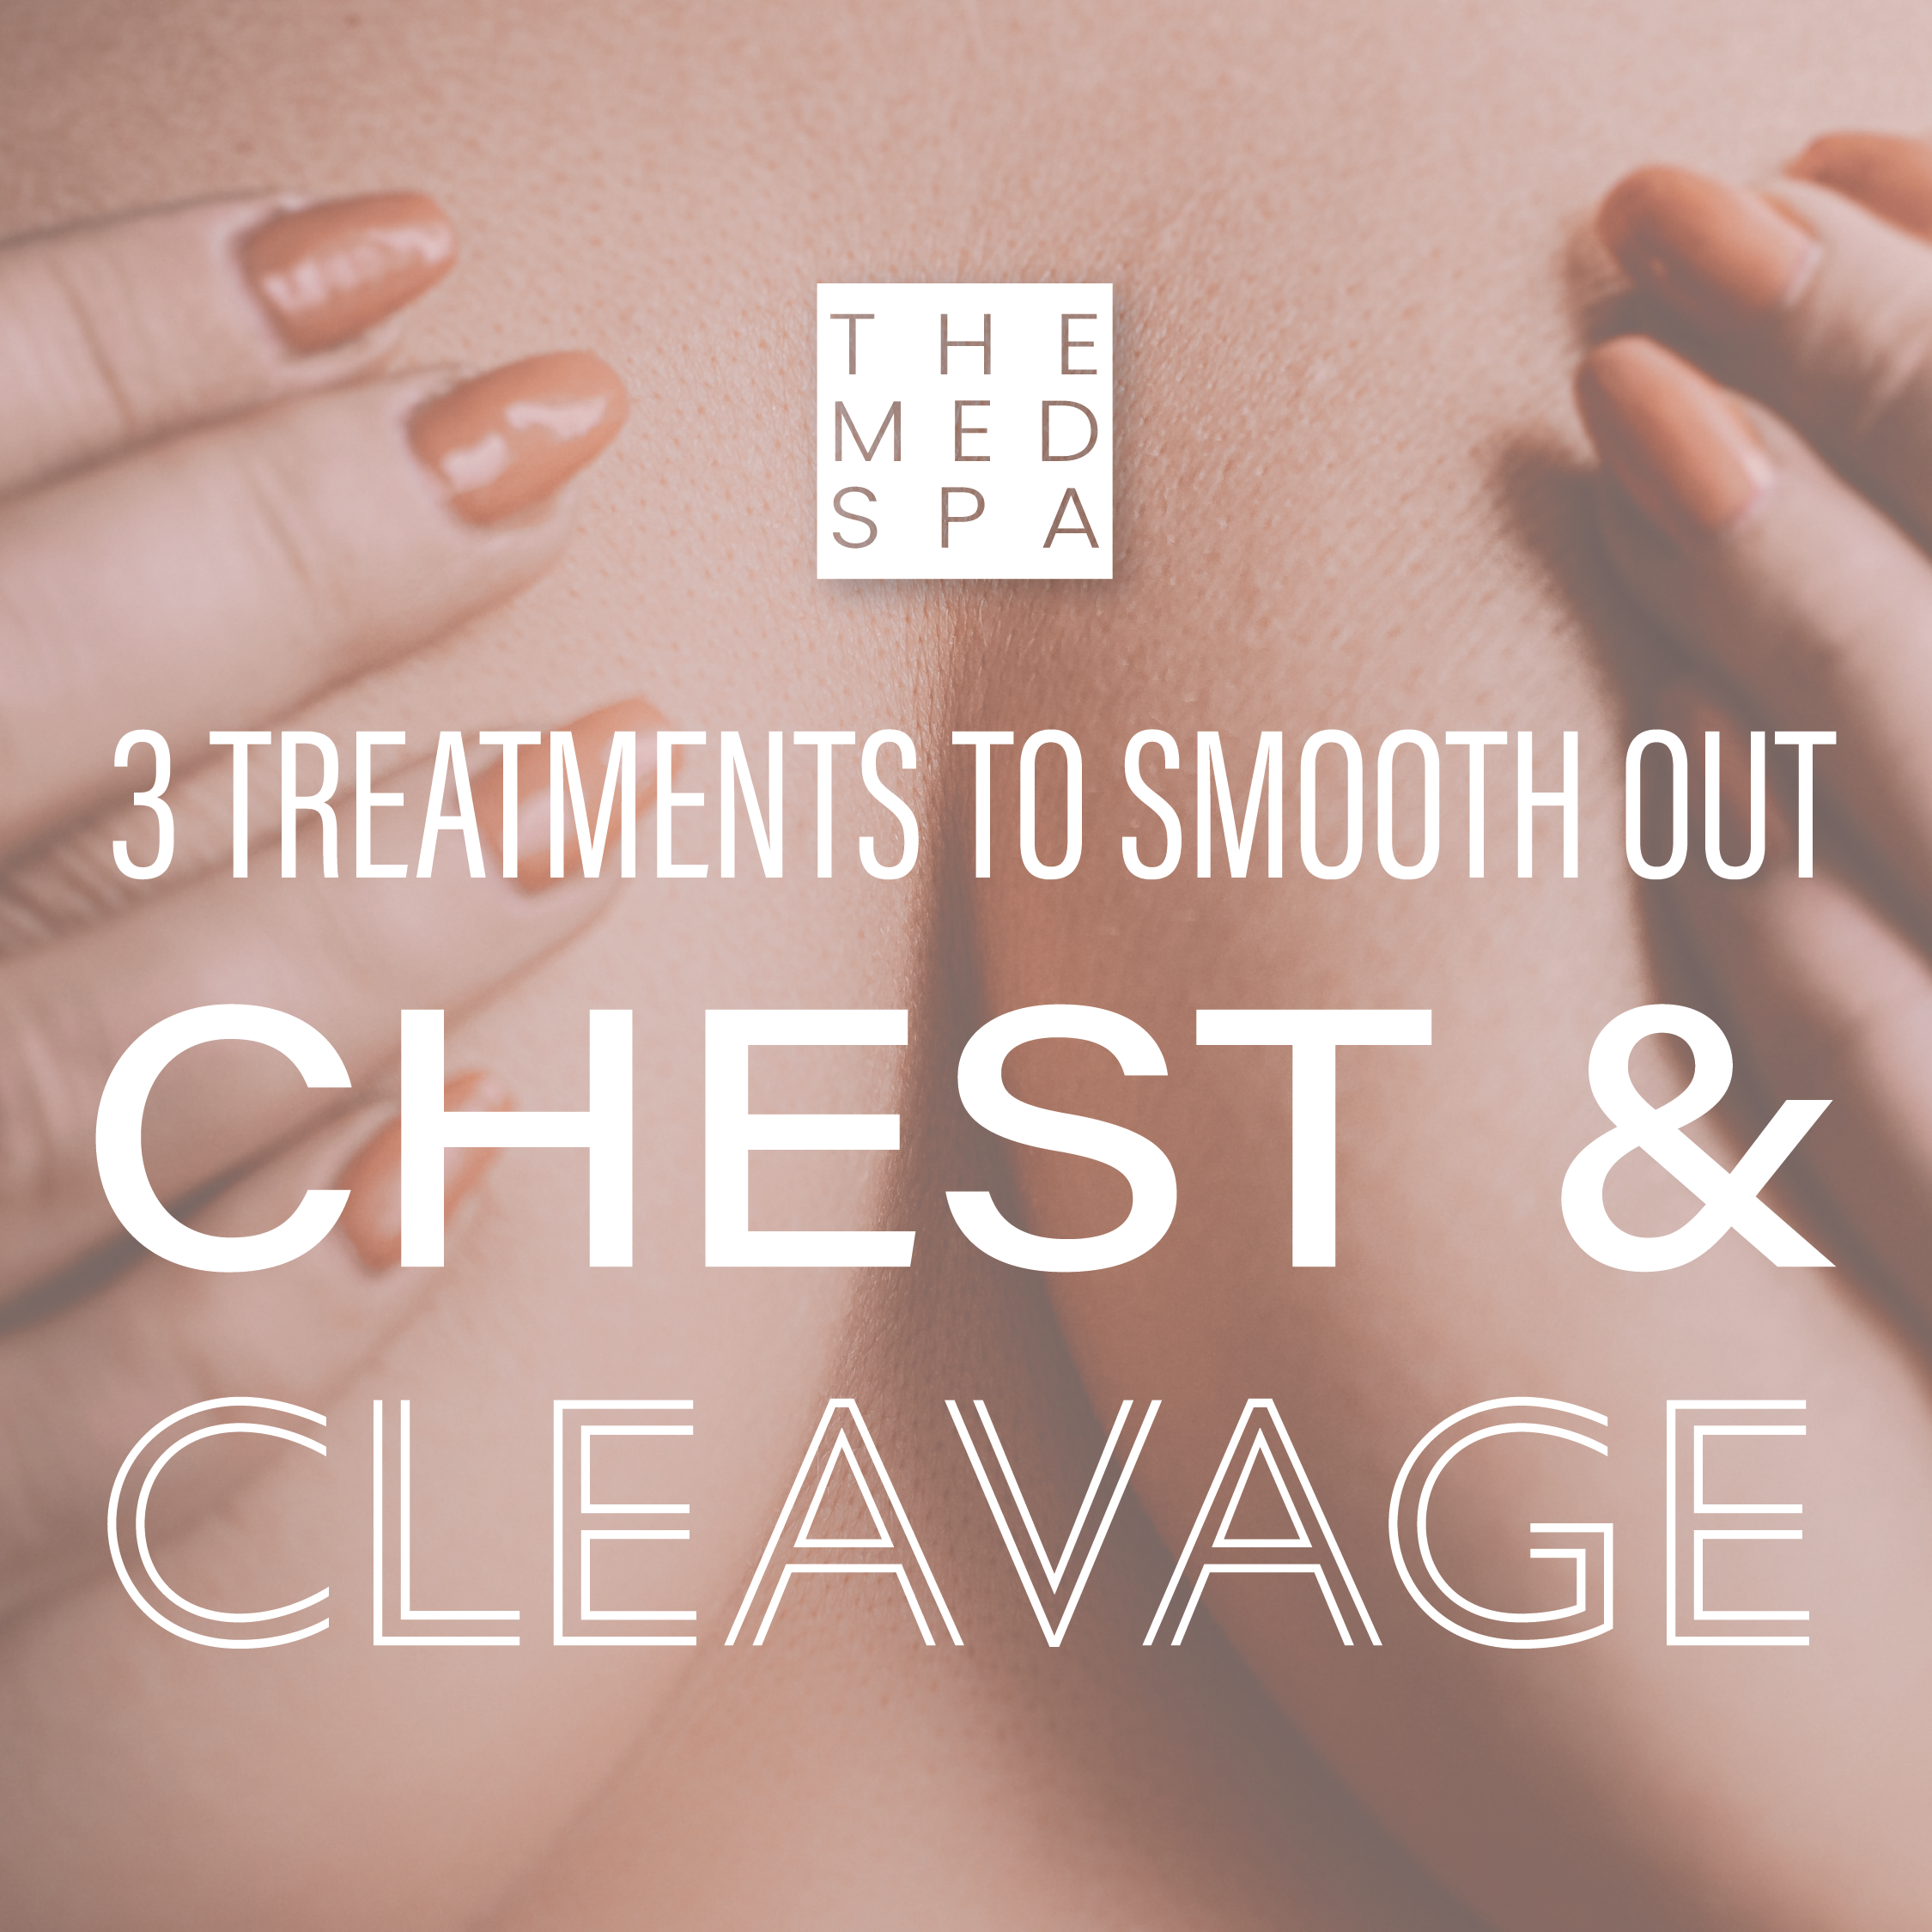 Smooth Out Chest and Cleavage Wrinkles with These 3 Treatments — THE MED SPA